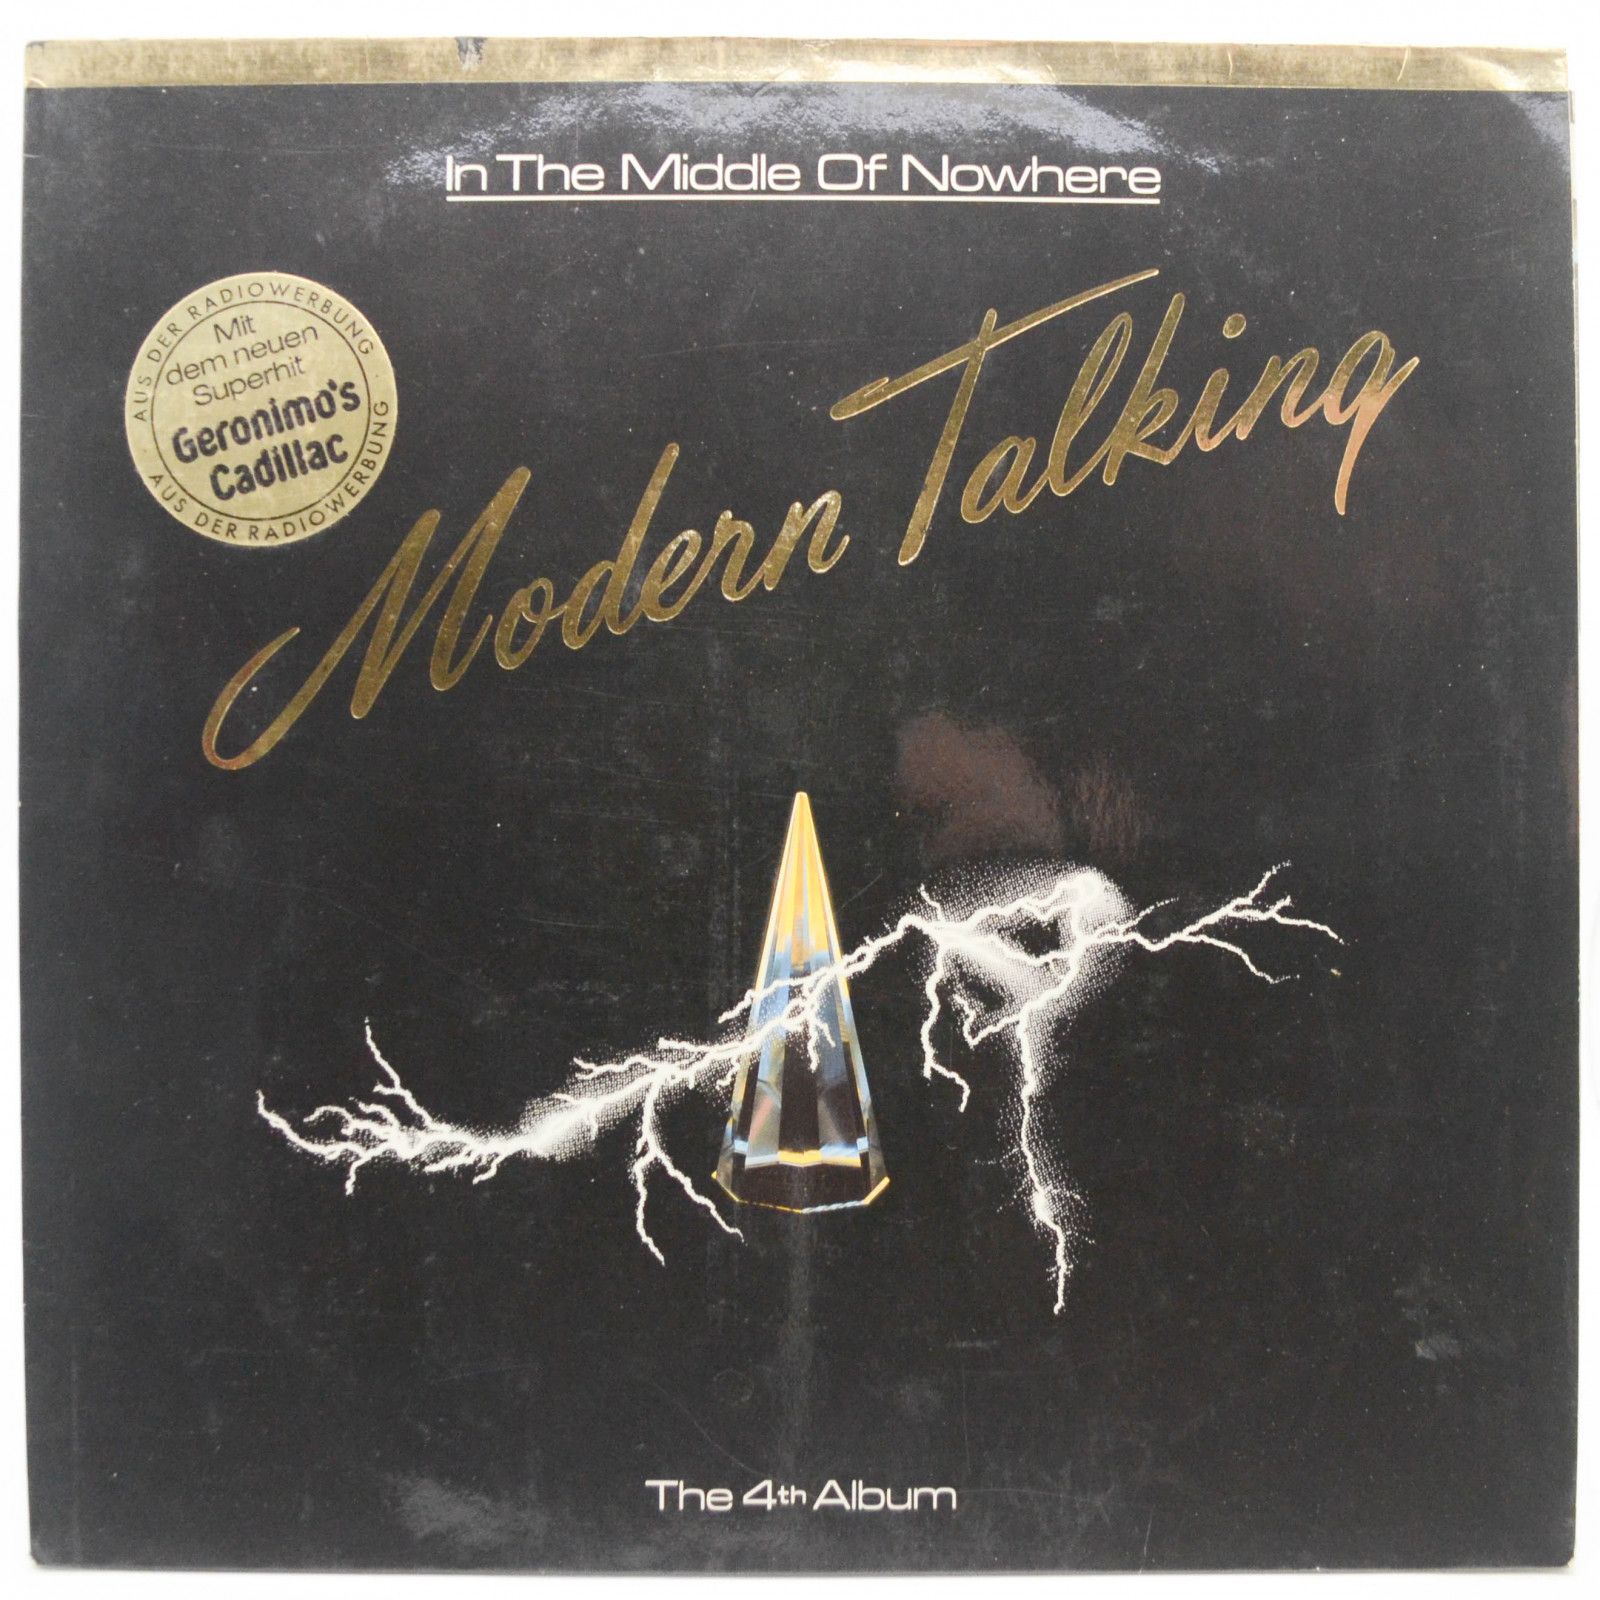 Modern Talking — In The Middle Of Nowhere - The 4th Album, 1986